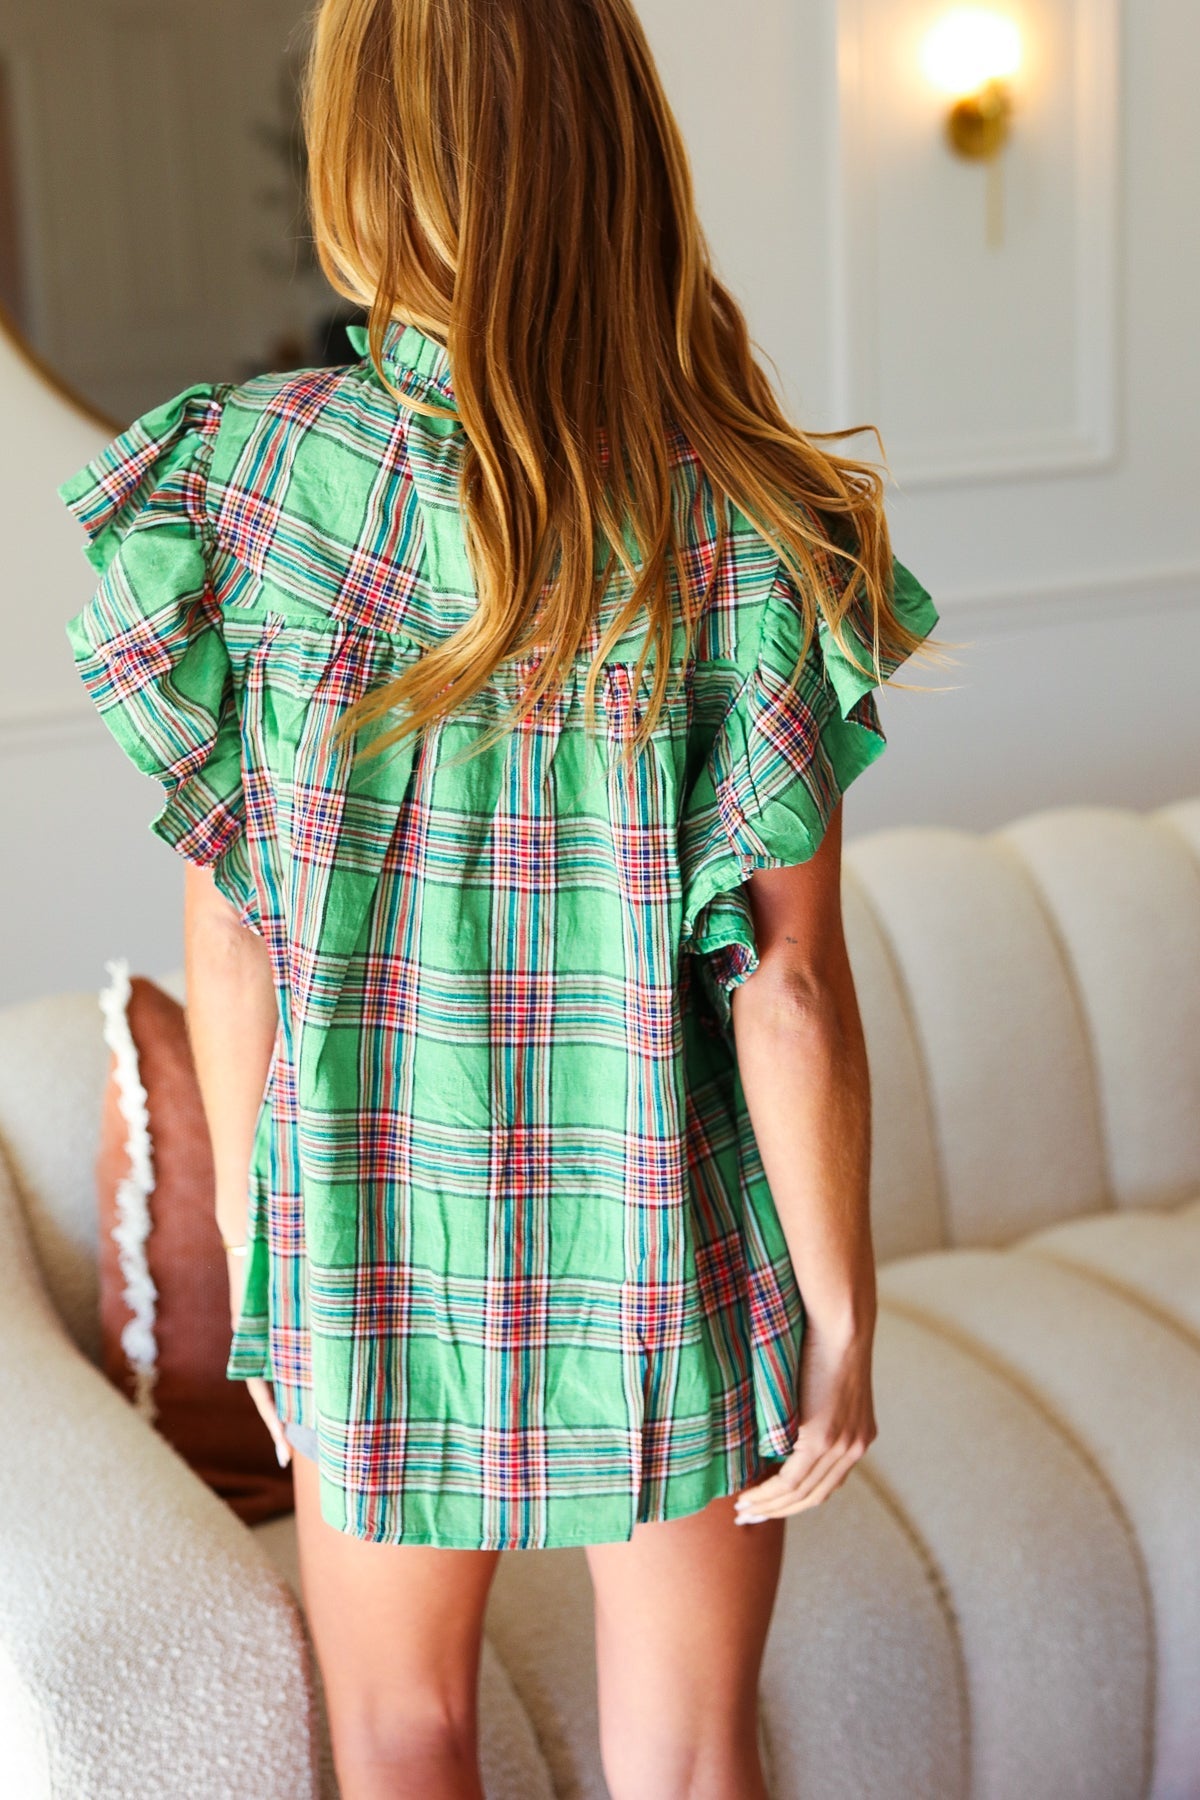 Live For Today Top in Green Plaid